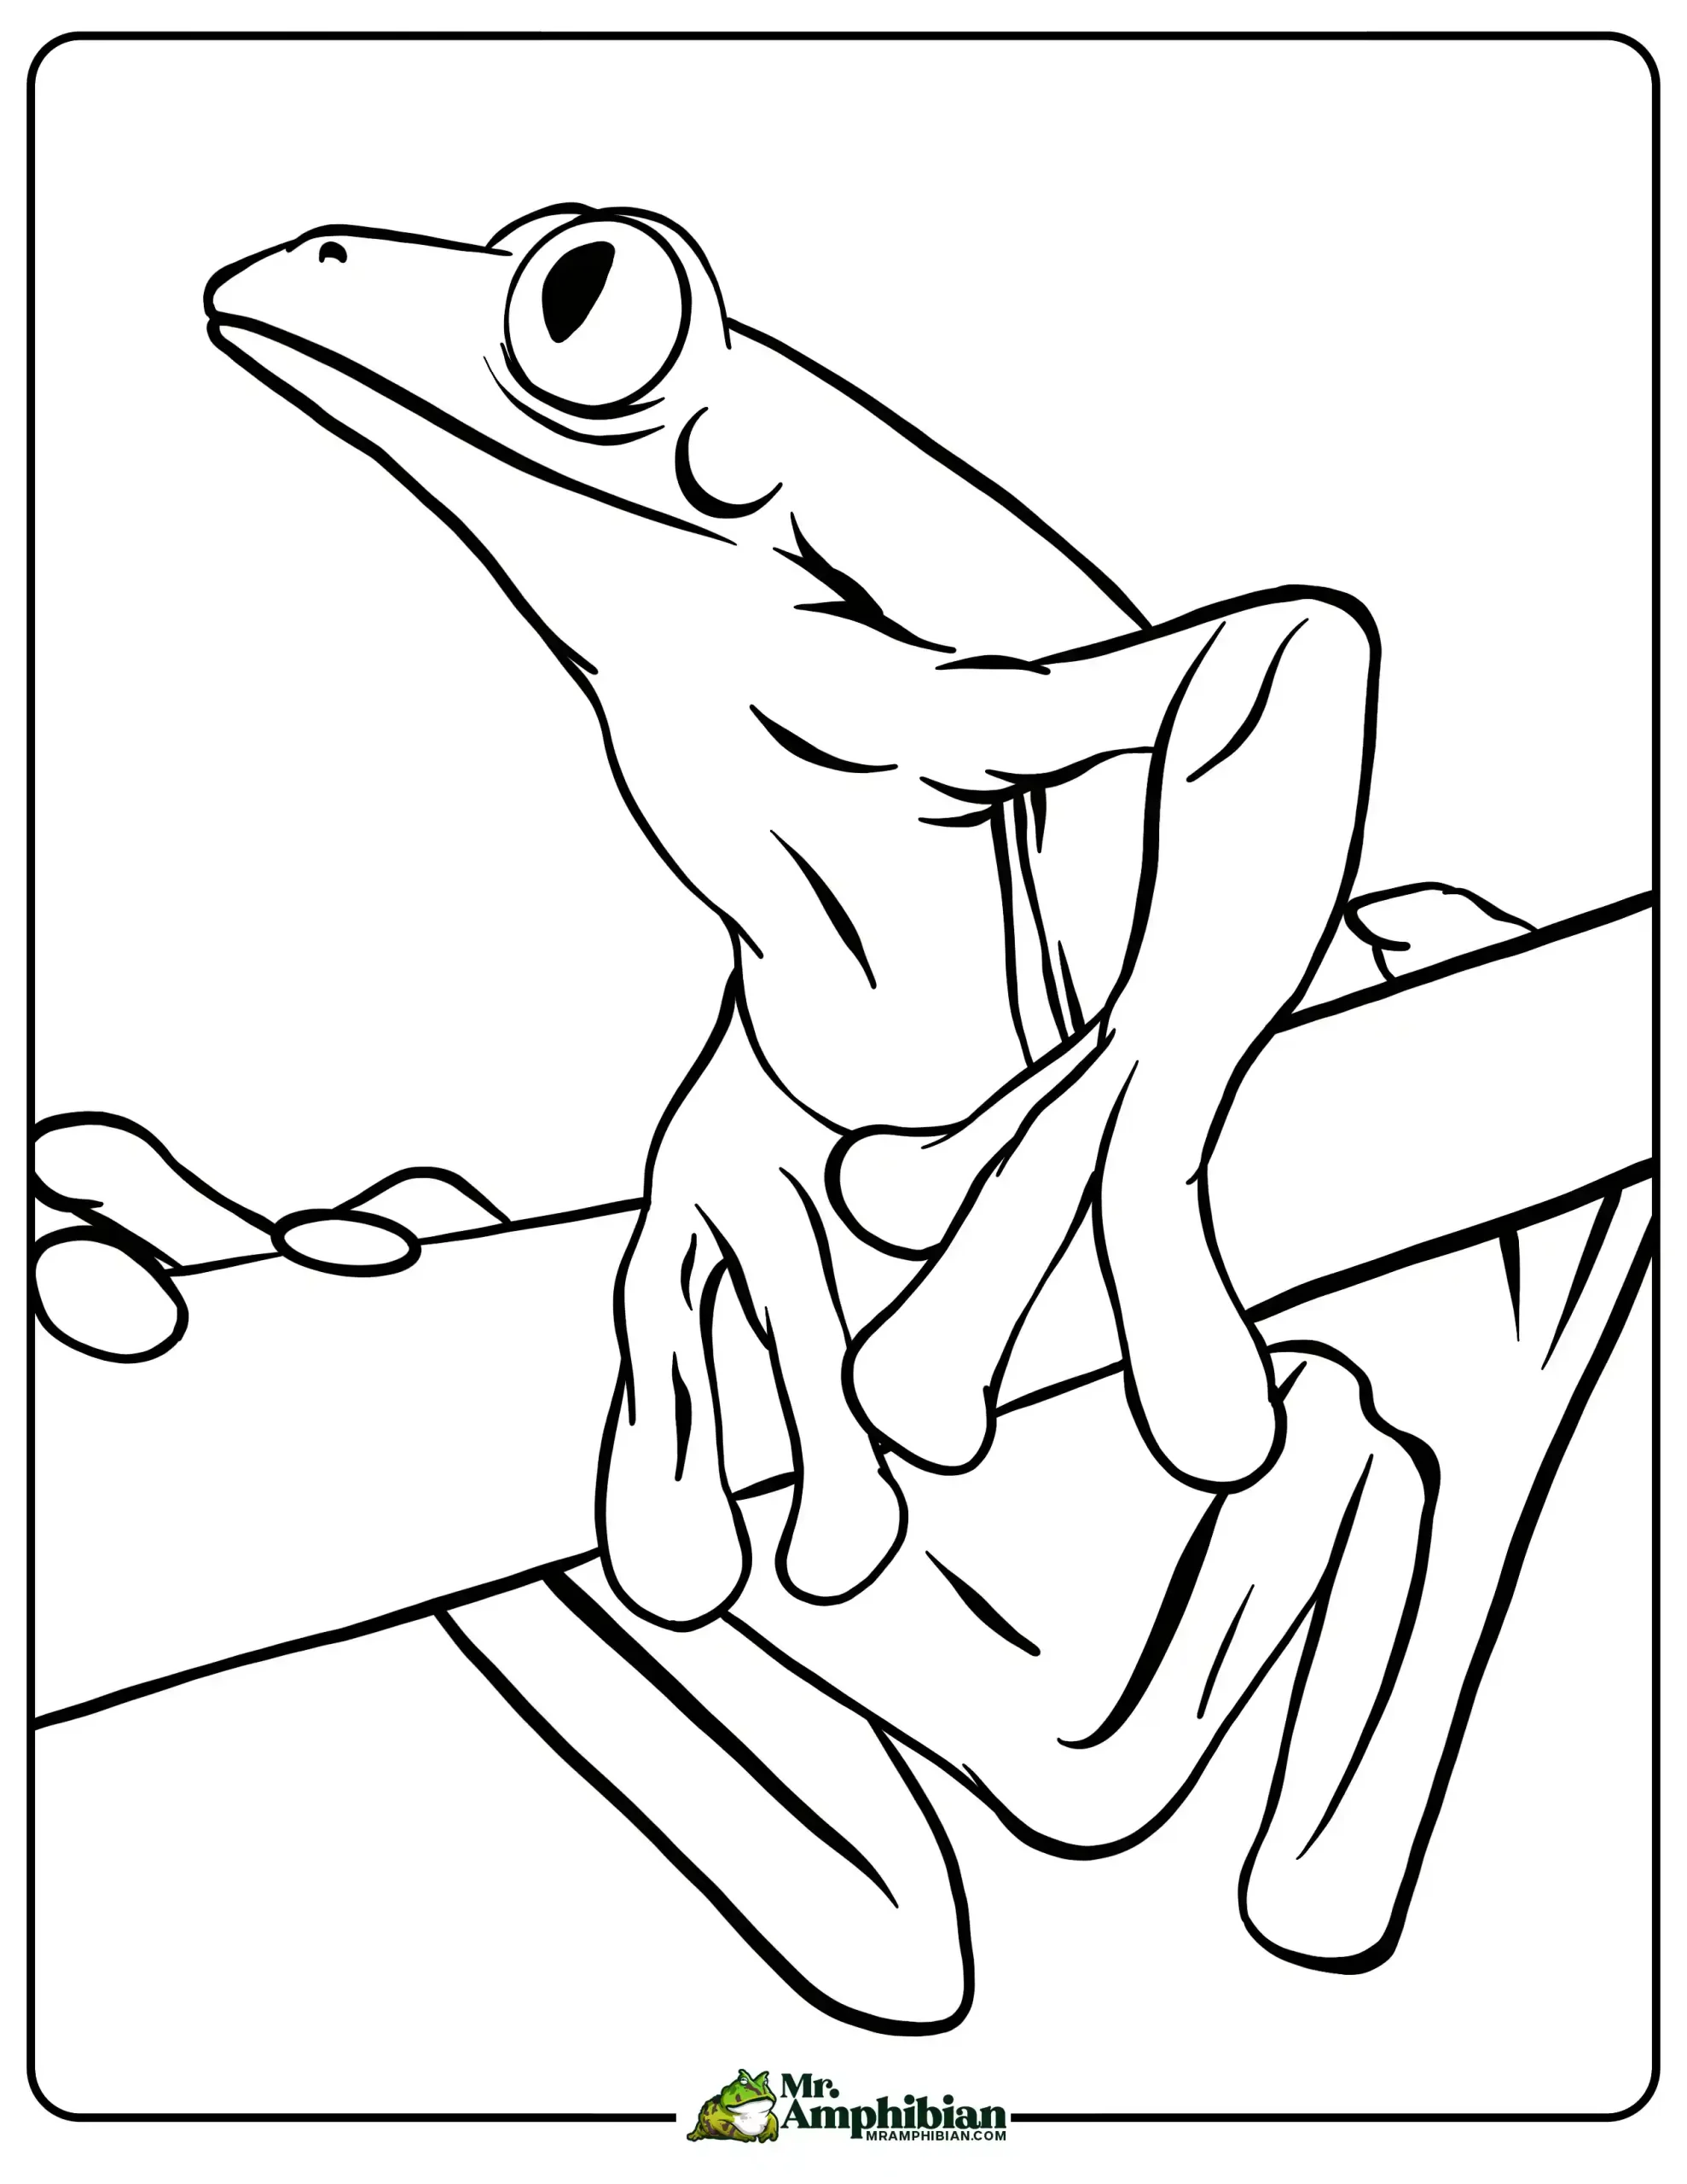 Tree Frog Coloring Page 01